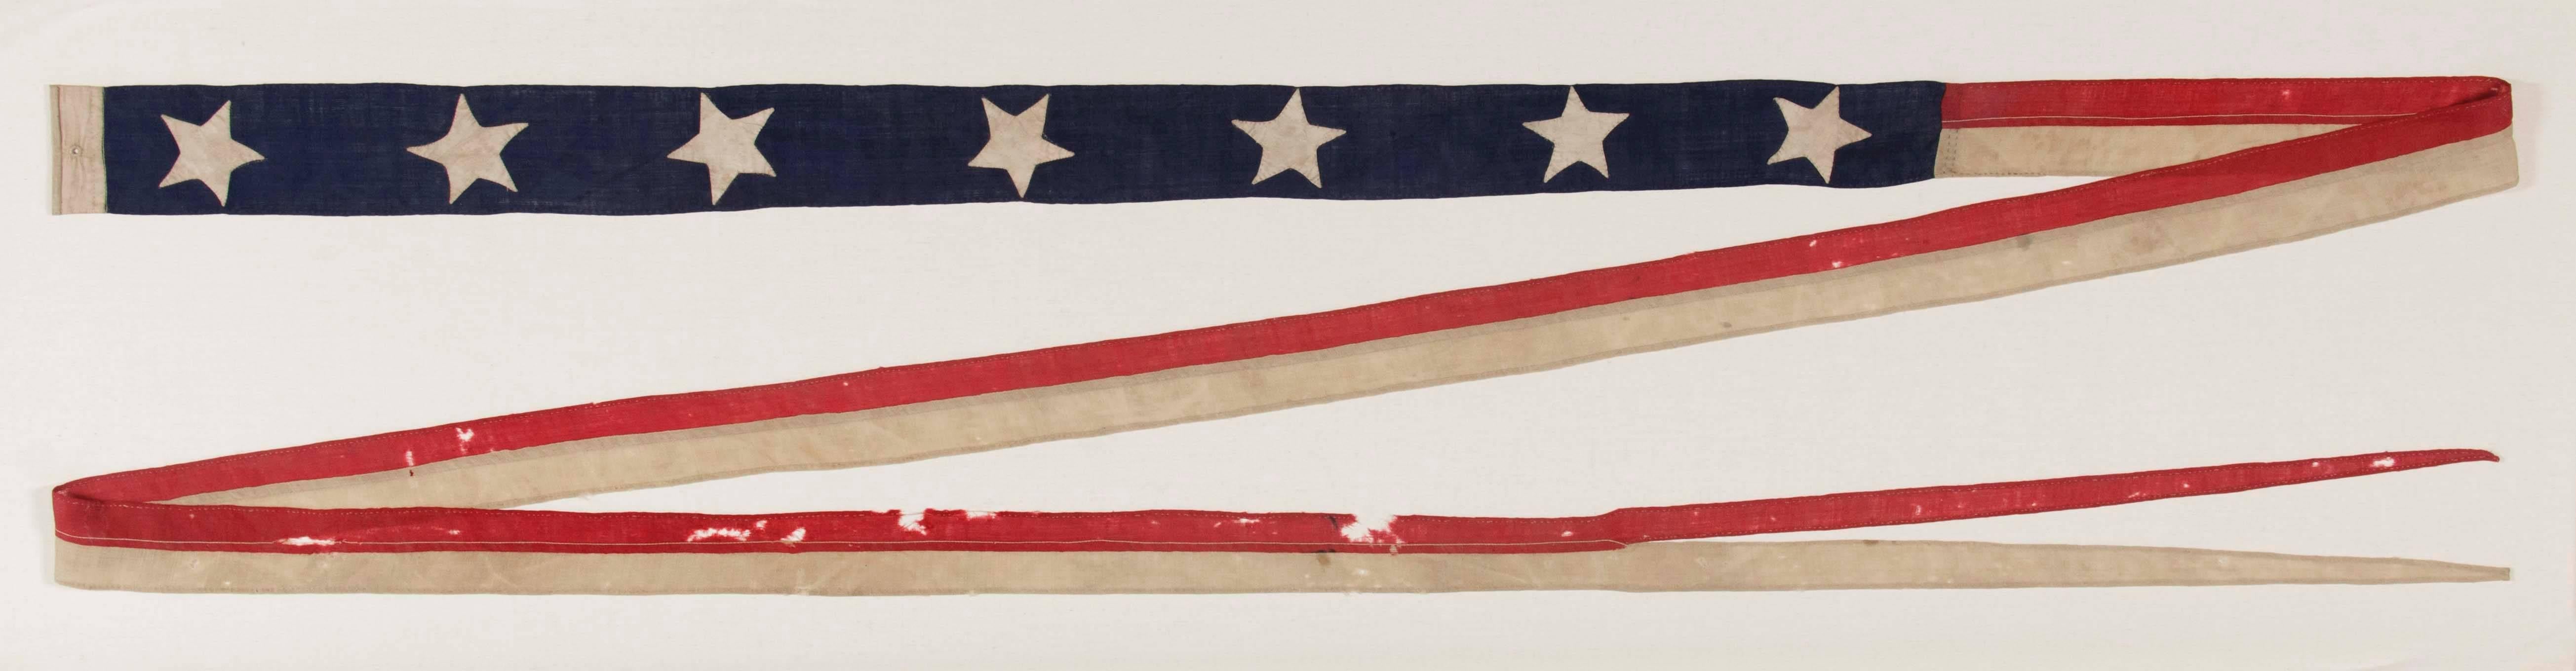 U.S. Navy Commissioning Pennant with 7 stars, possibly made aboard ship, circa 1864-1865.

 Commissioning pennants are the distinguishing mark of a commissioned U.S. Navy ship. These have a narrow blue canton, followed by one red over one white